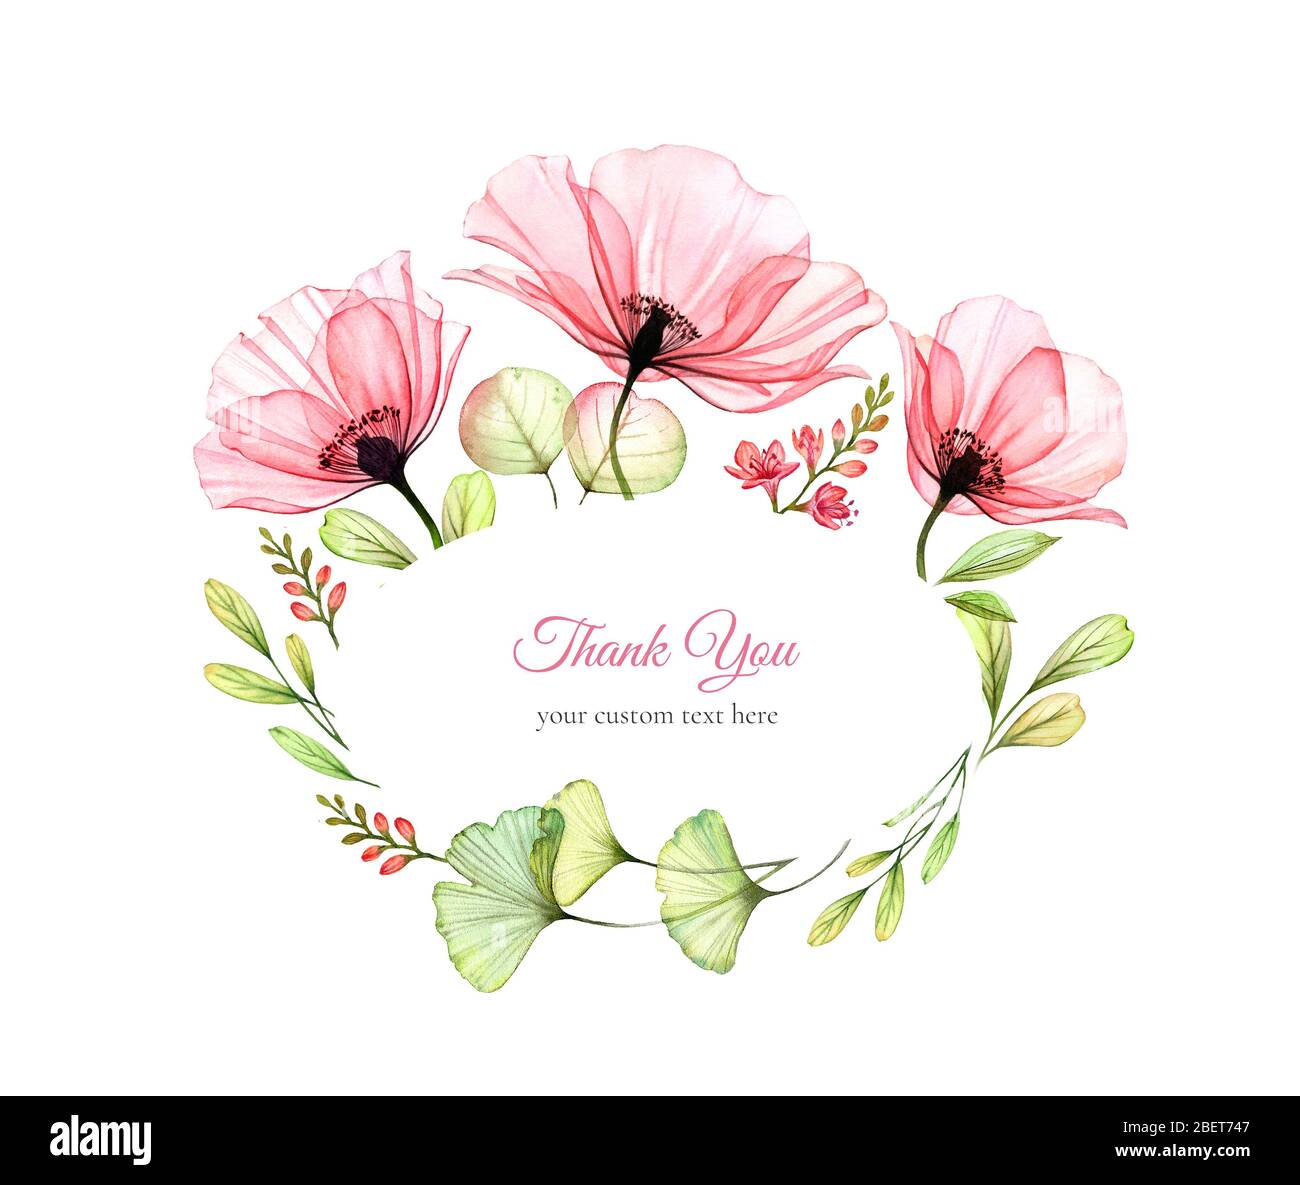 Watercolor floral arrangement. Bouquet with big field flowers, poppy, leaves. Oval frame. Thank you Card template with place for text Stock Photo